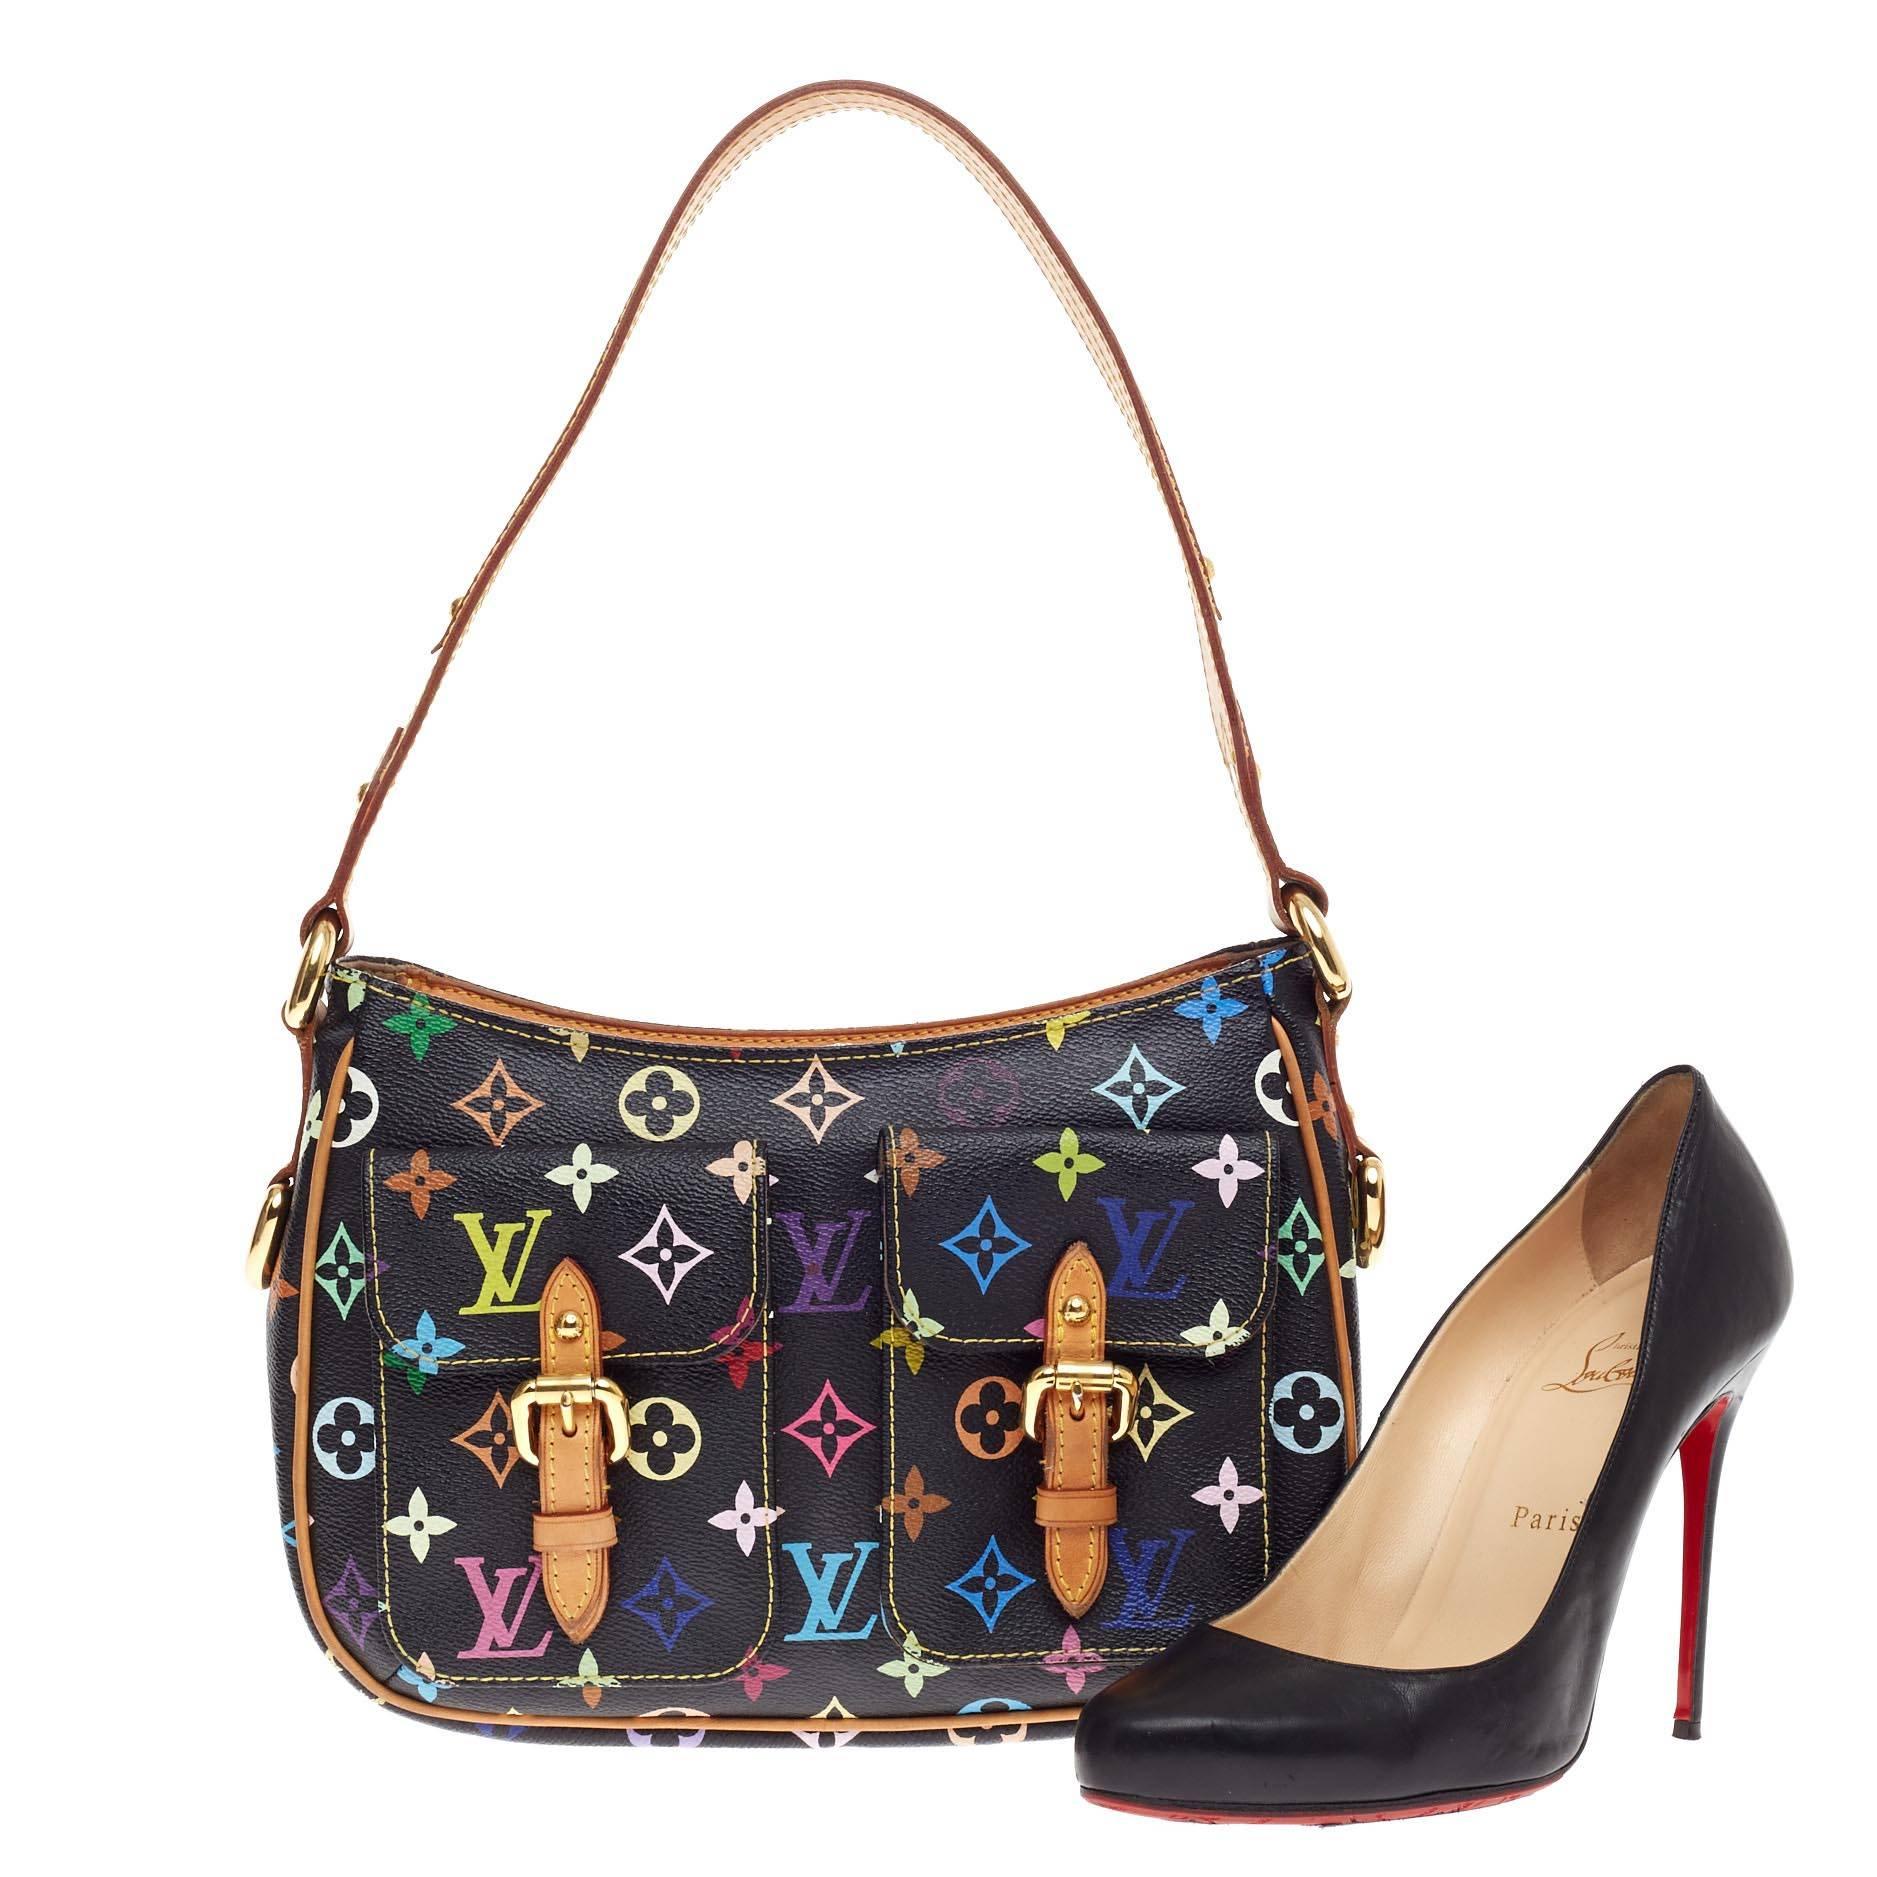 This authentic Louis Vuitton Lodge Monogram Multicolor PM combines style and functionality apt for the modern day woman. Constructed from Louis Vuitton's signature black monogram multicolor printed canvas, this classic shoulder bag features a wide